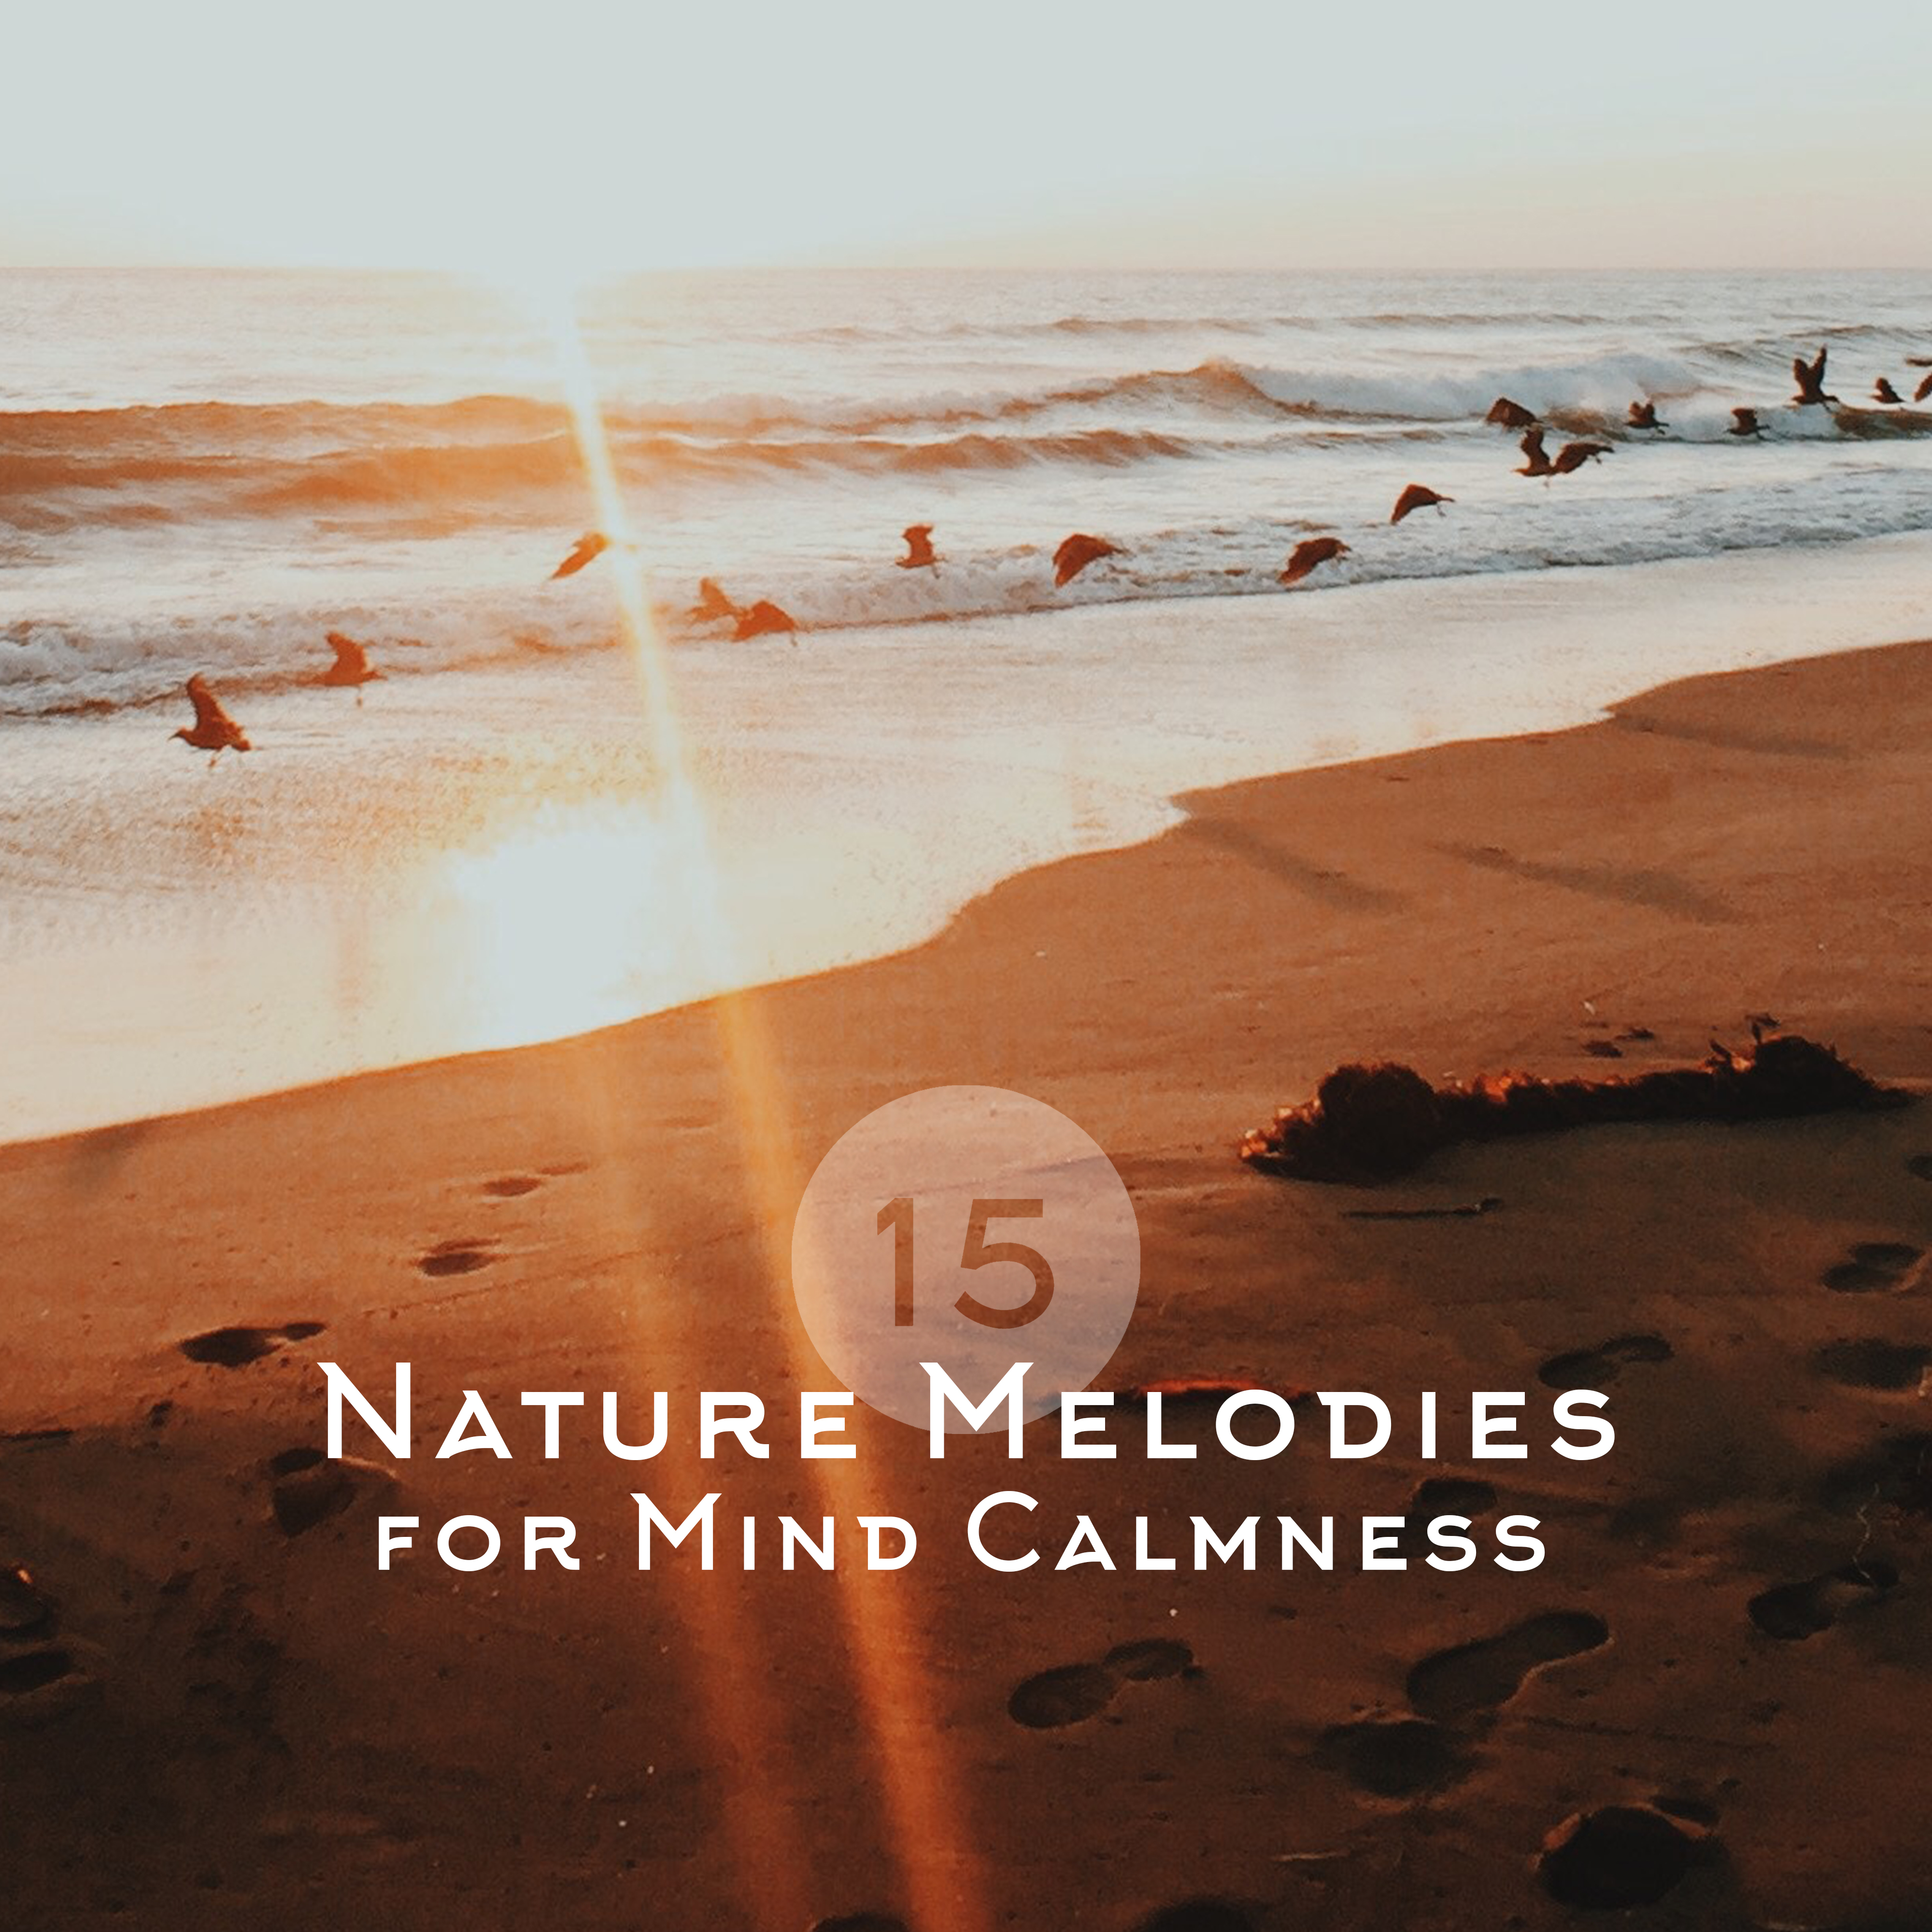 15 Nature Melodies for Mind Calmness